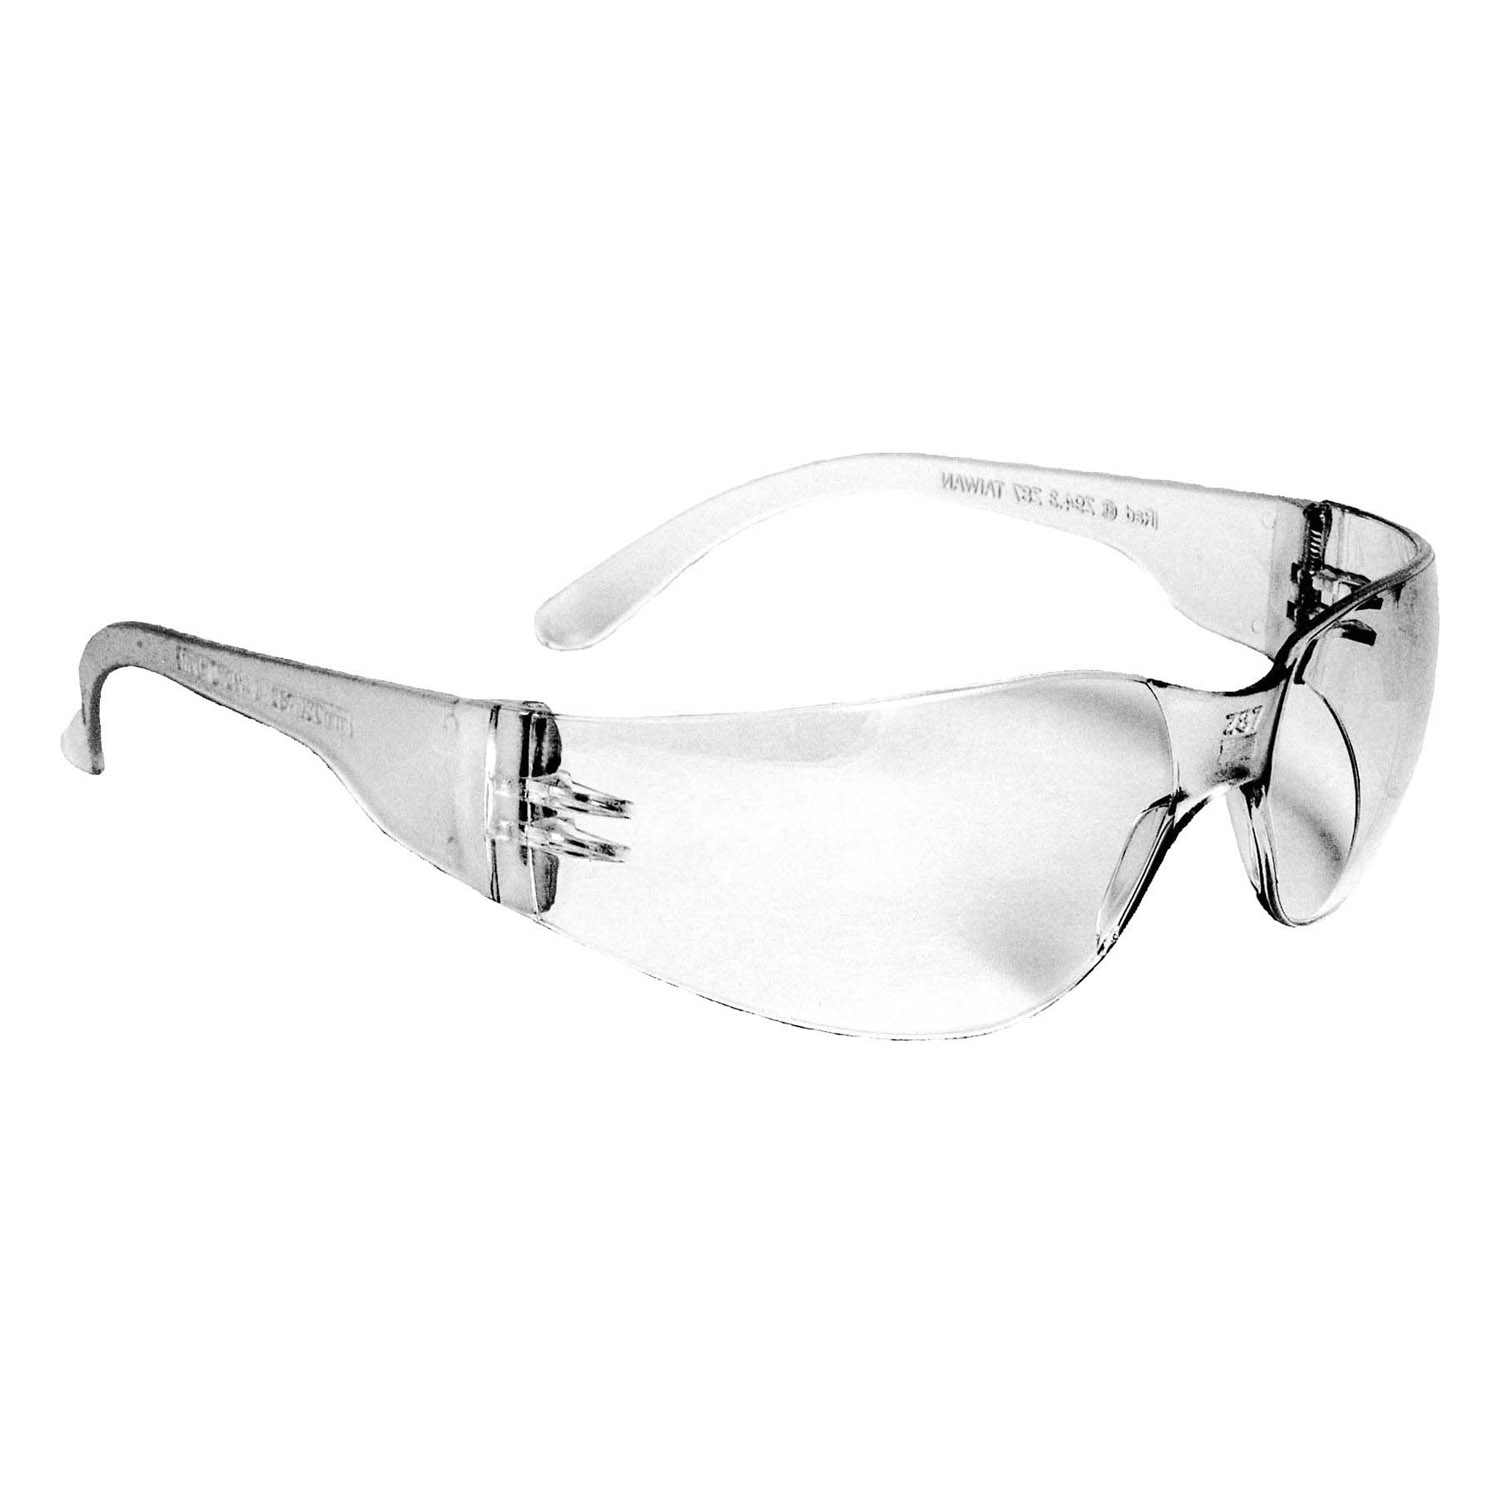 RADIANS MR0110ID Safety Glasses Clear Scratch-Resistant NEW IN BOX !!!! 